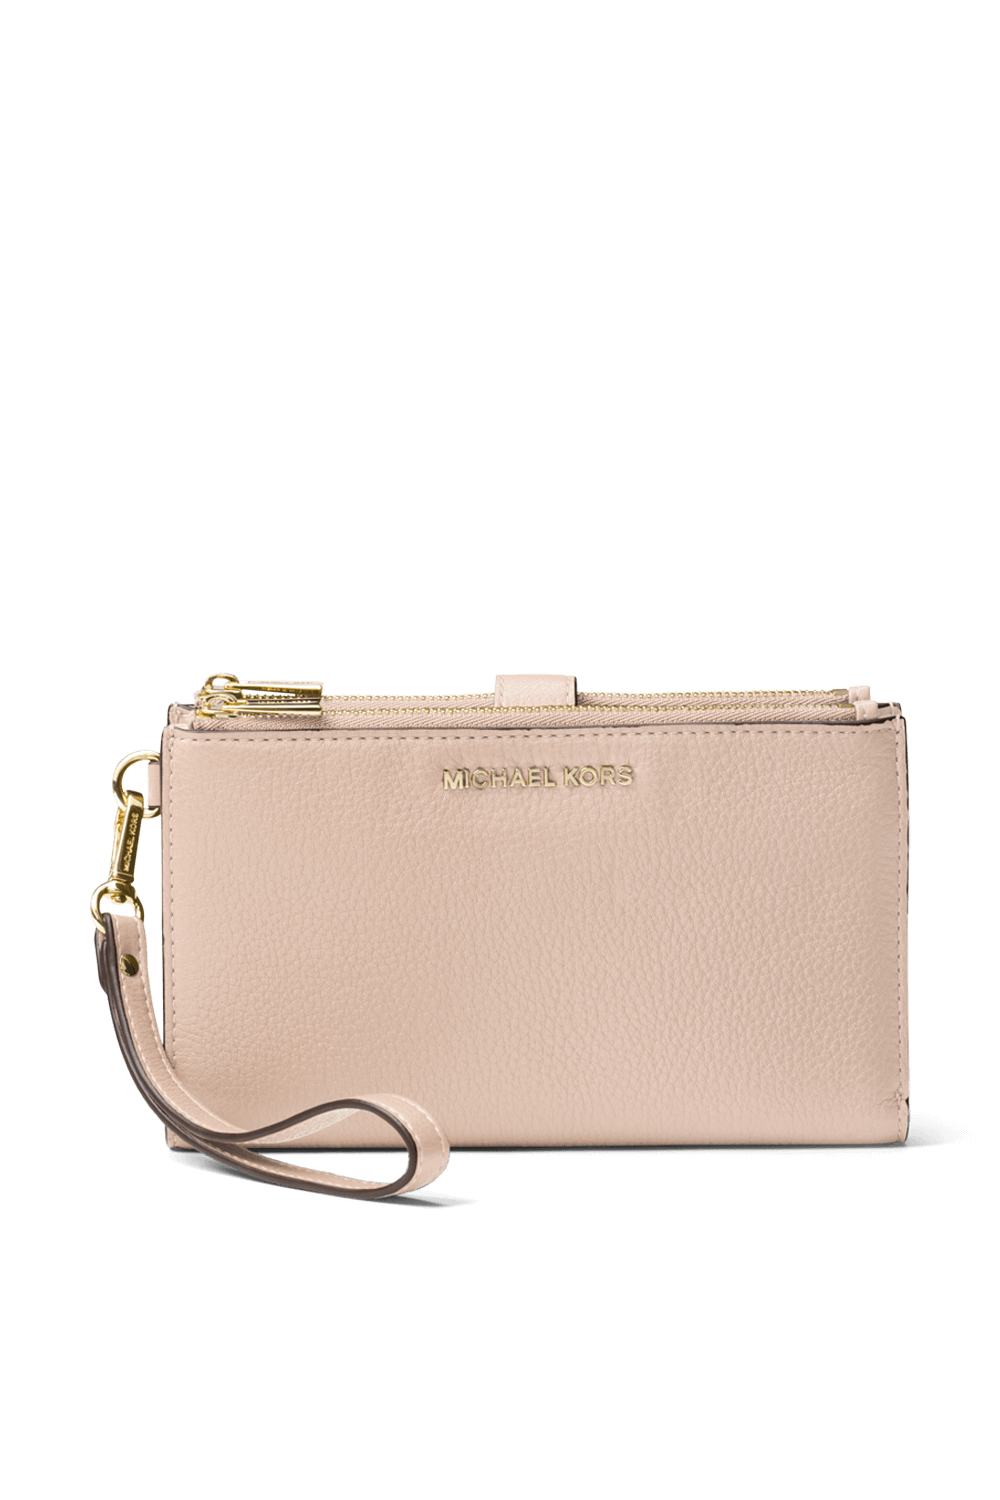 Adele Leather Smartphone Wallet in Soft Pink MICHAEL KORS